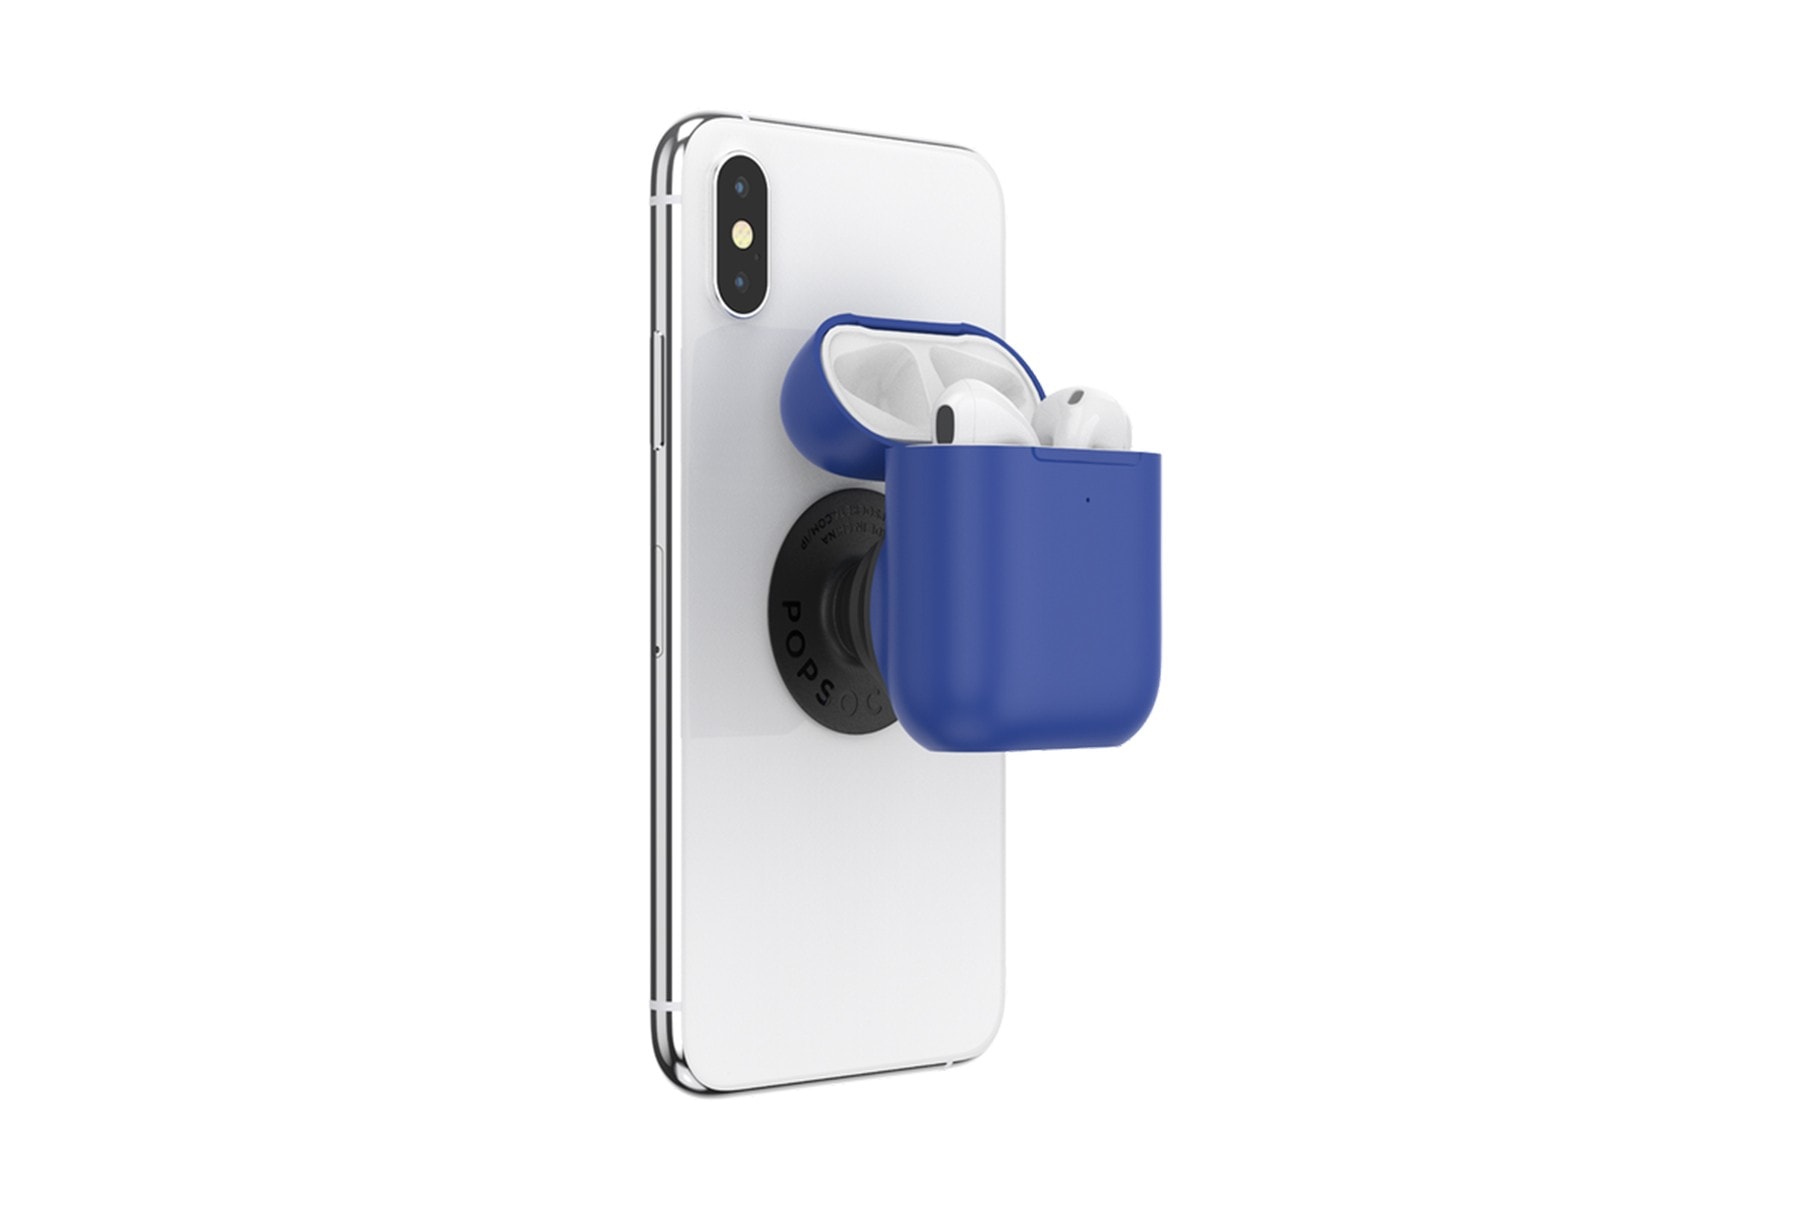 popsockets popgrip apple iphone 11 pro airpods earphones holder wireless charging tech accessory 